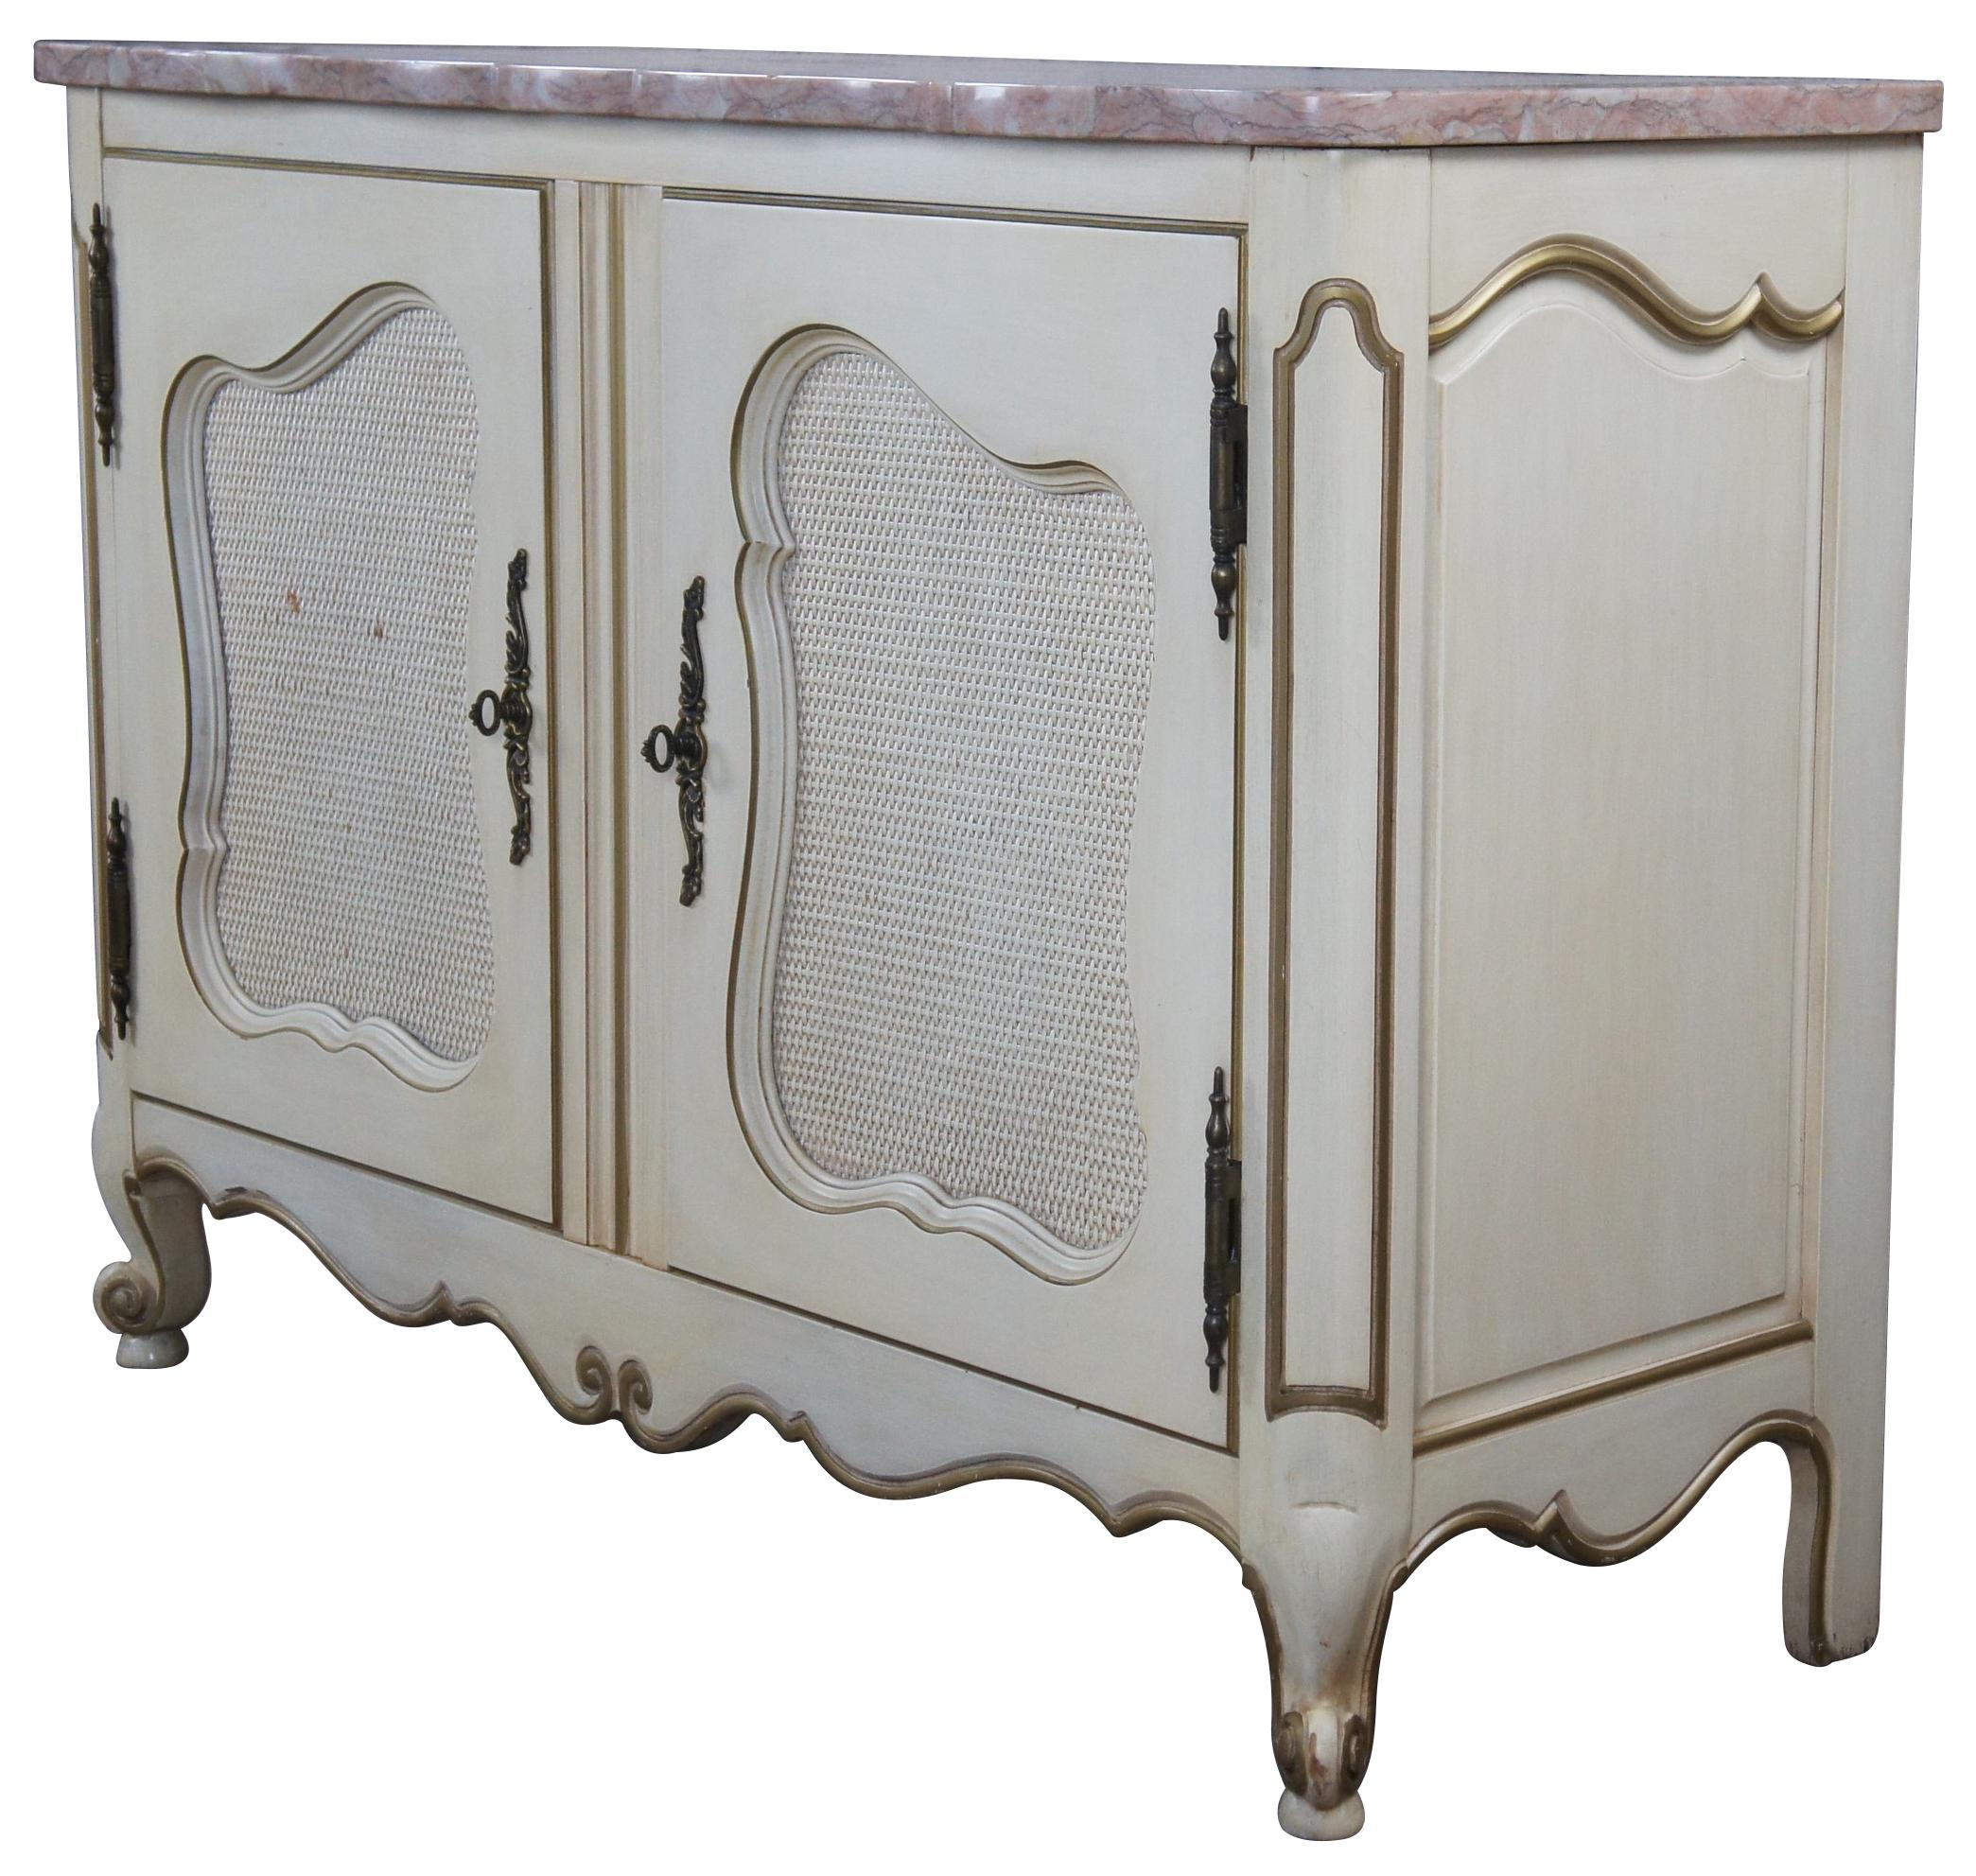 French Provincial console or cabinet, circa 1959. Features a serpentine pink marble top over rectangular base of two doors with inset rattan backing and cabriole scrolled feet. The cabinet is enhanced by shapely molding trimmed in gold and scrolling